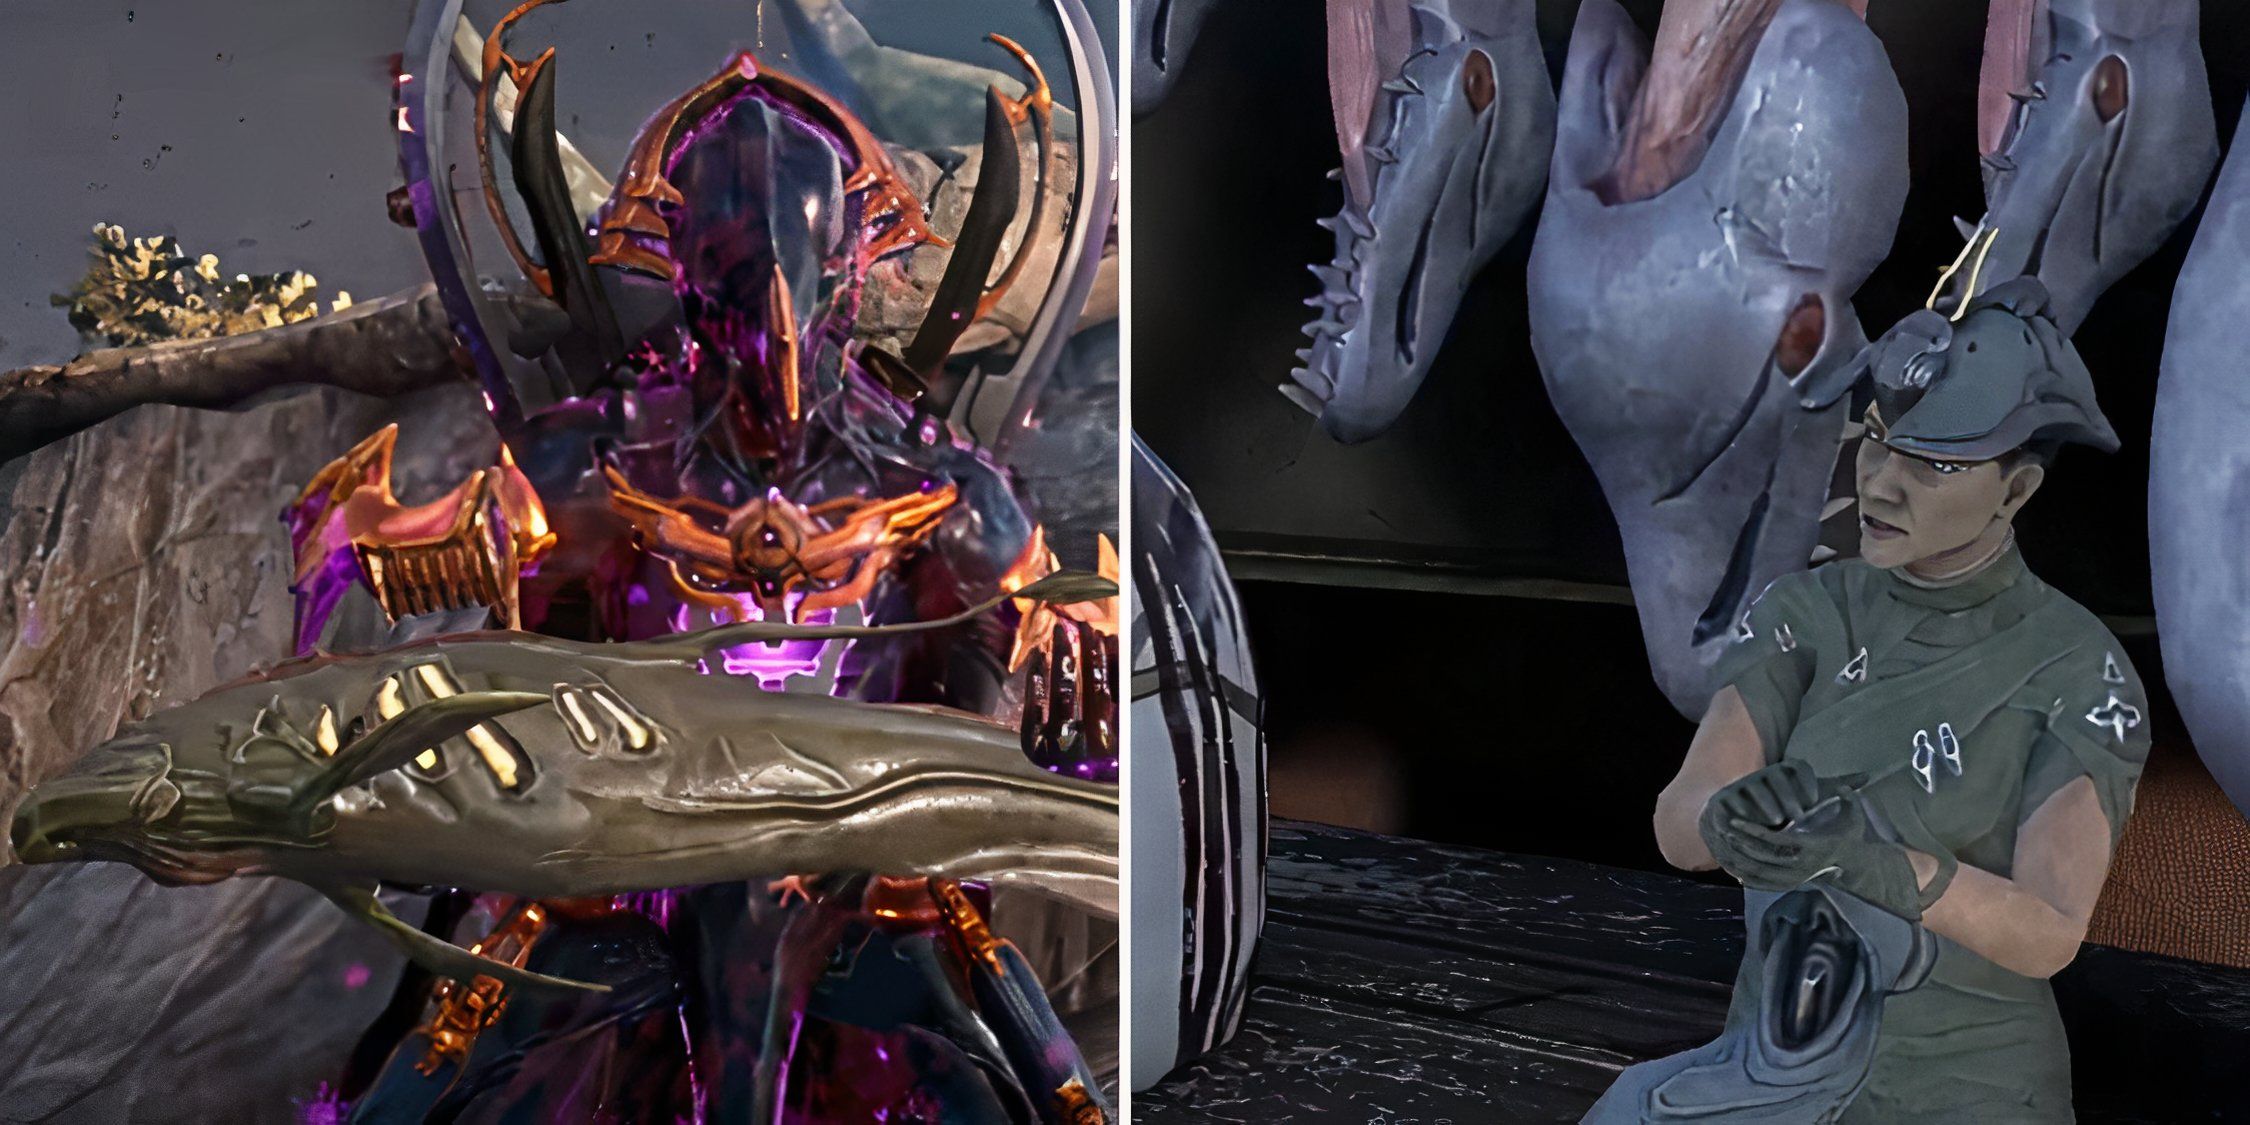 The Warframe character is about to receive some Charc Electroplax harvested by the fish woman from the Charc Eel they caught.